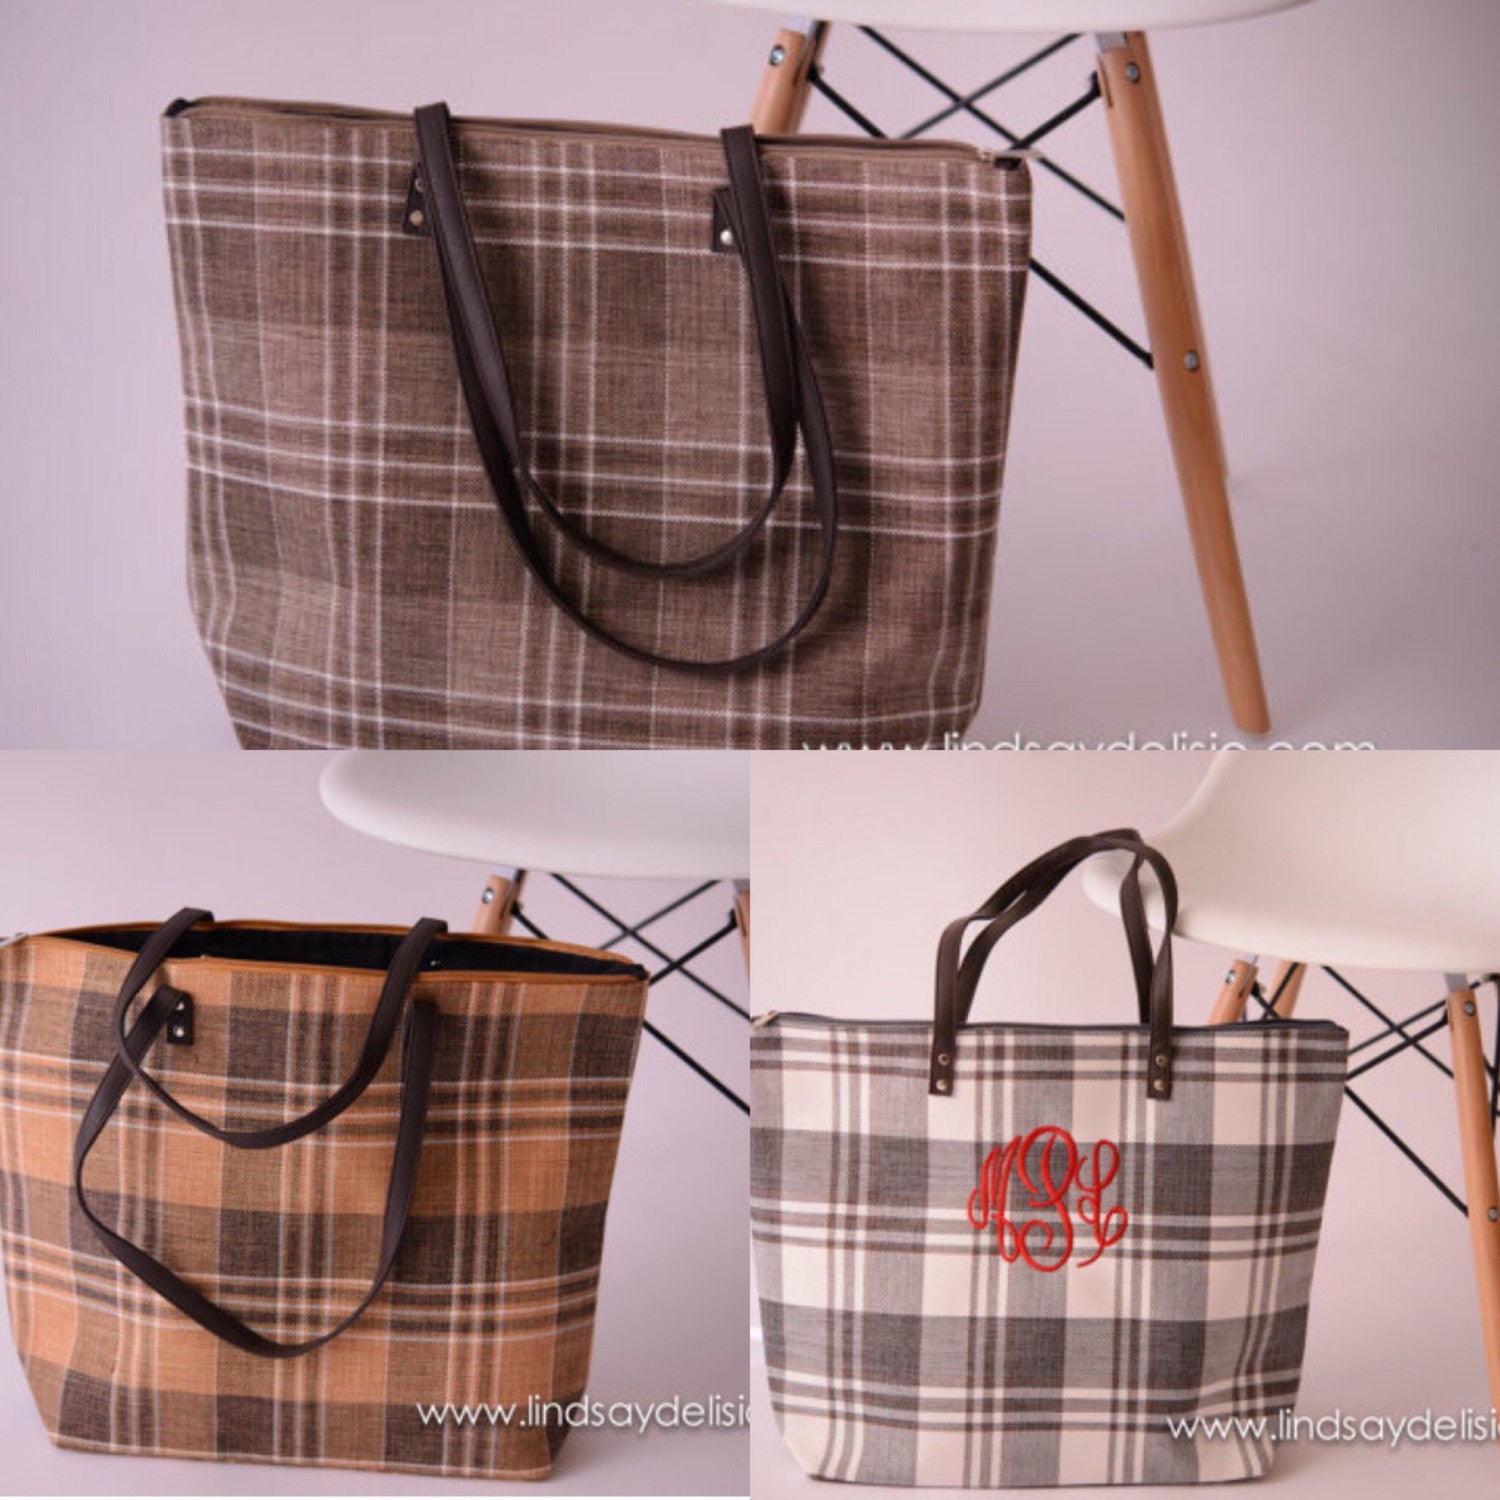 Cream Plaid Tote Bag by Rose Gold